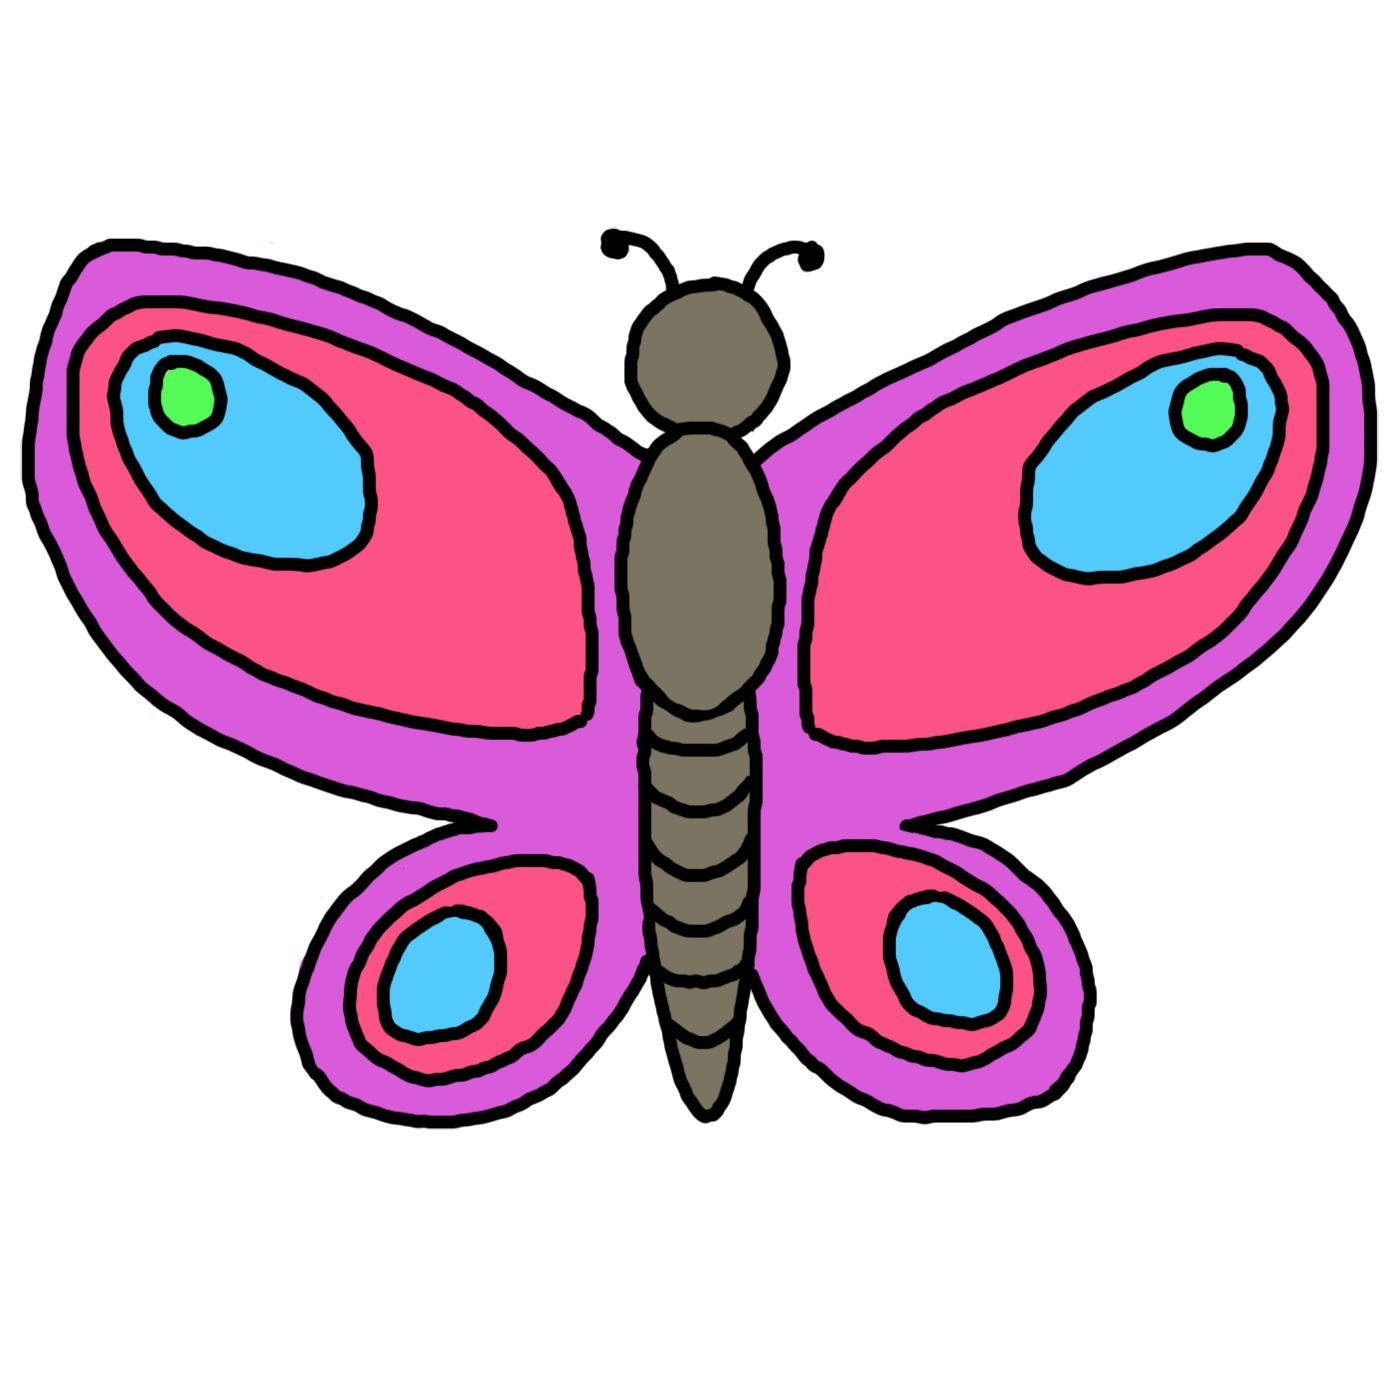 Small butterfly clipart - ClipartFox